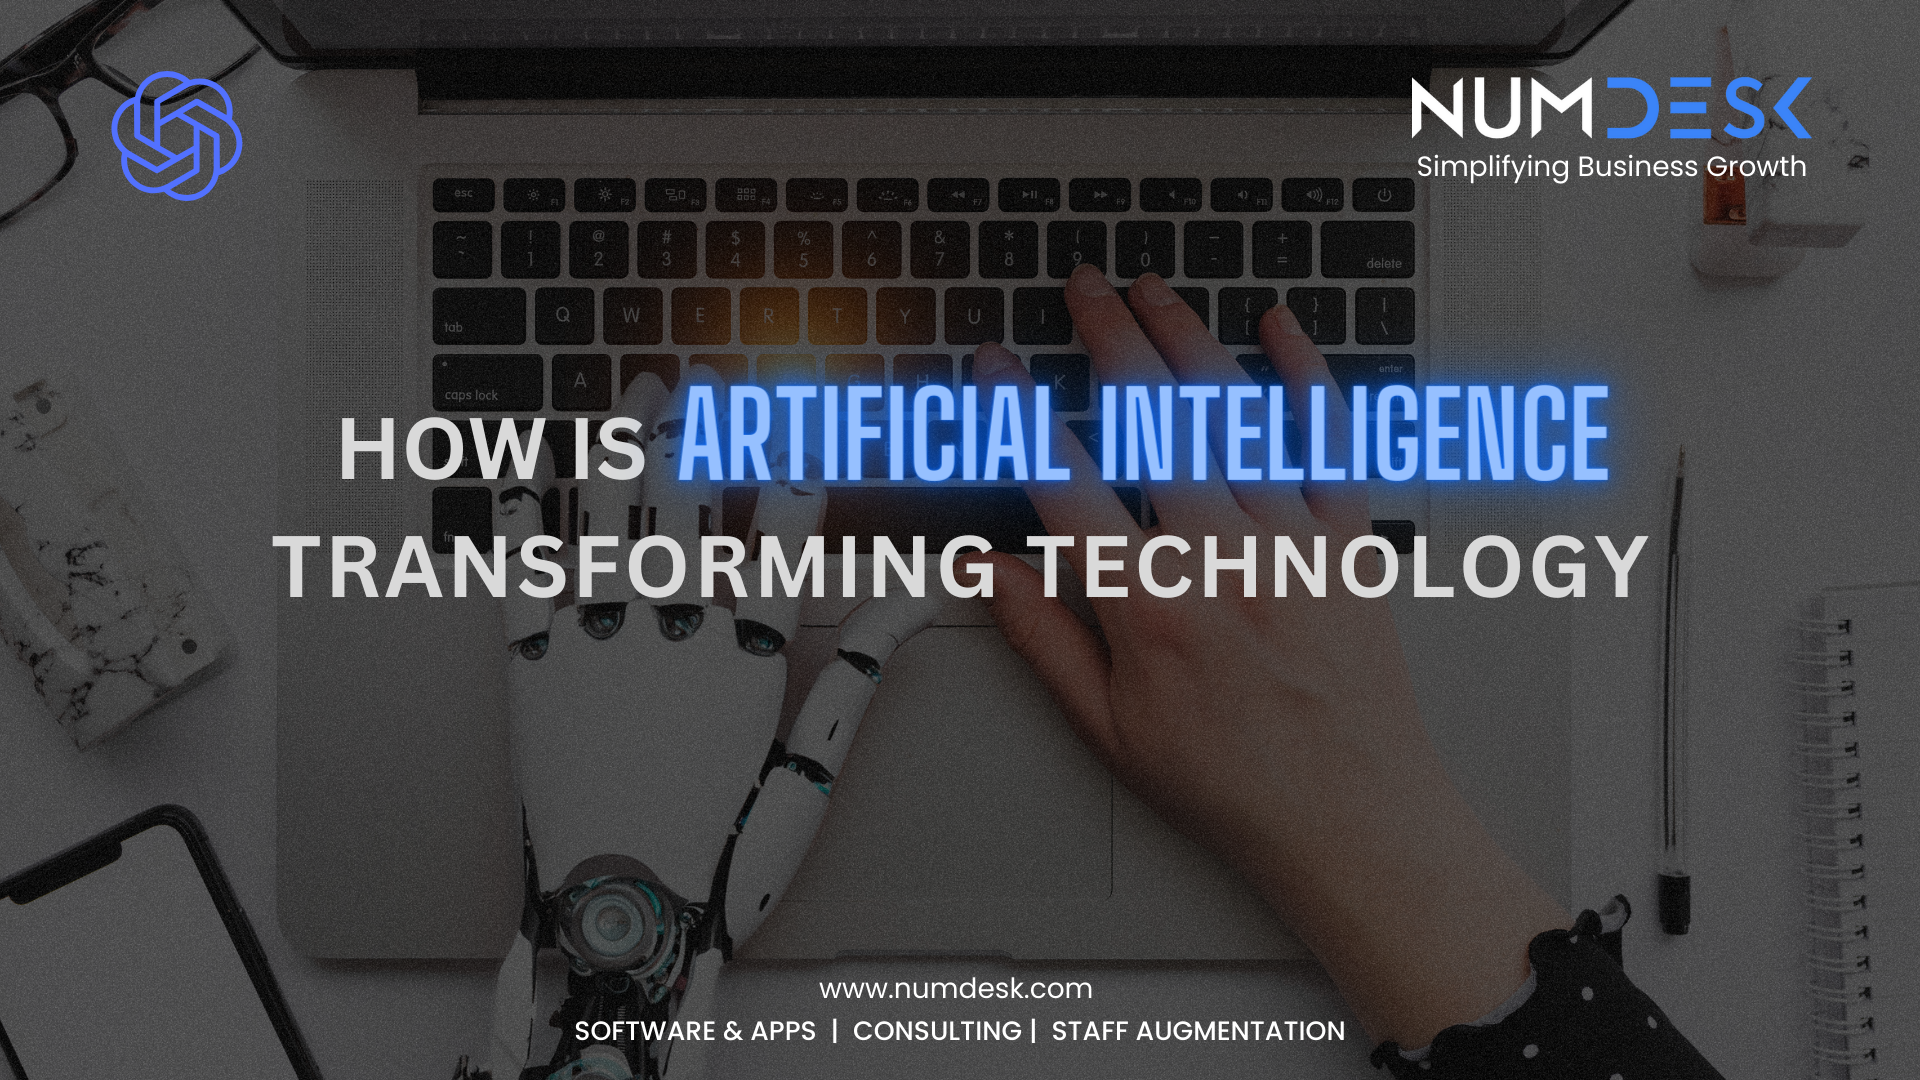 HOW IS ARTIFICIAL INTELLIGENCE TRANSFORMING TECHNOLOGY